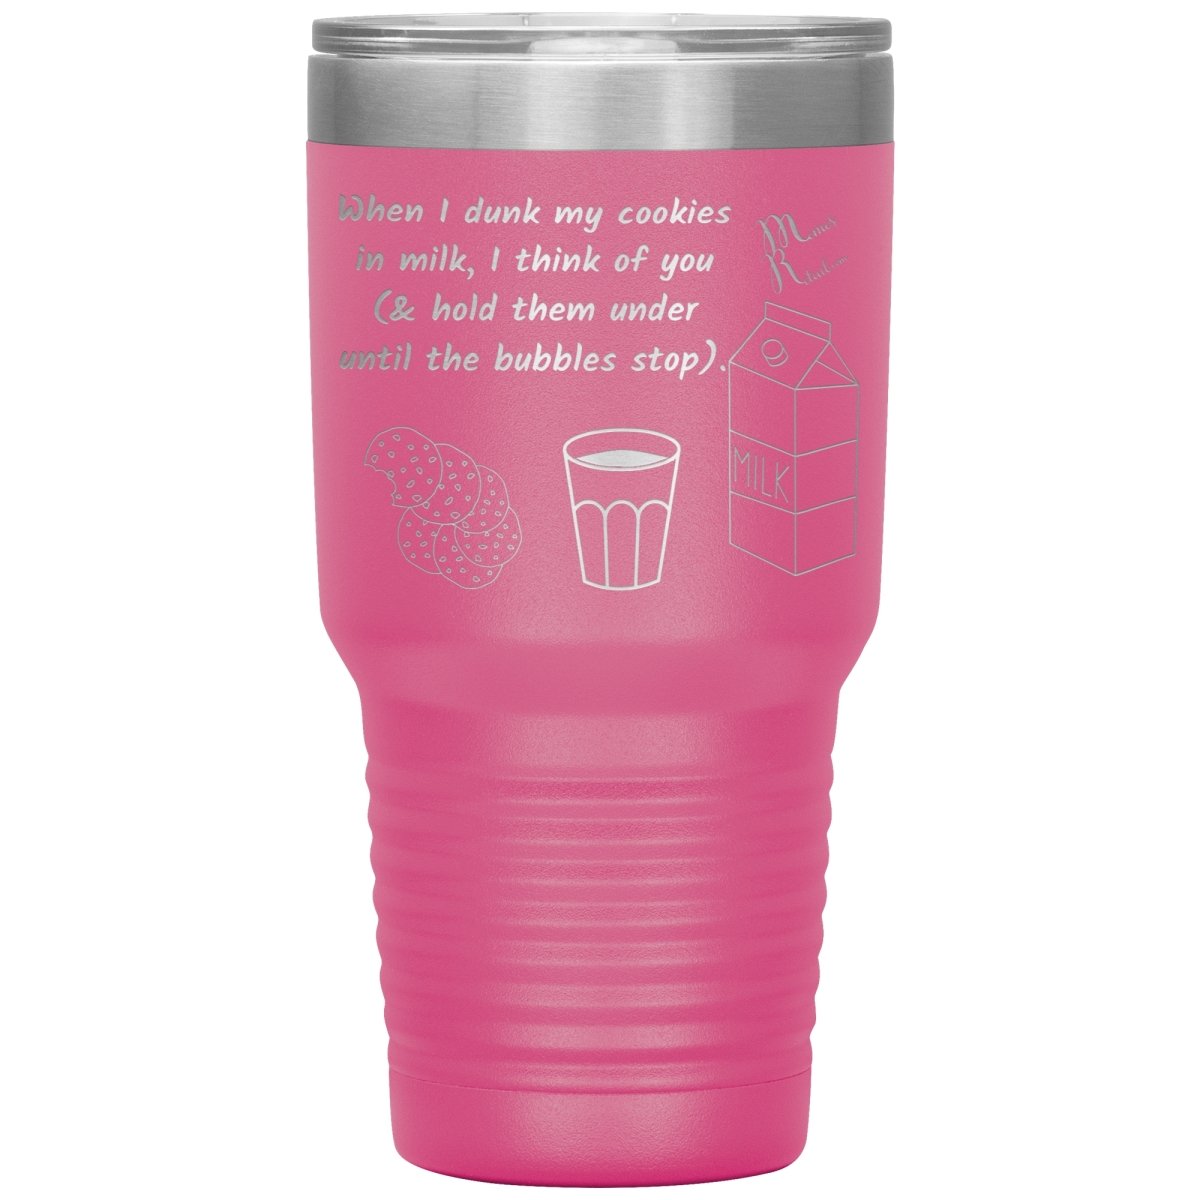 When I dunk My Cookies in Milk, I think of You - Tumblers, 30oz Insulated Tumbler / Pink - MemesRetail.com